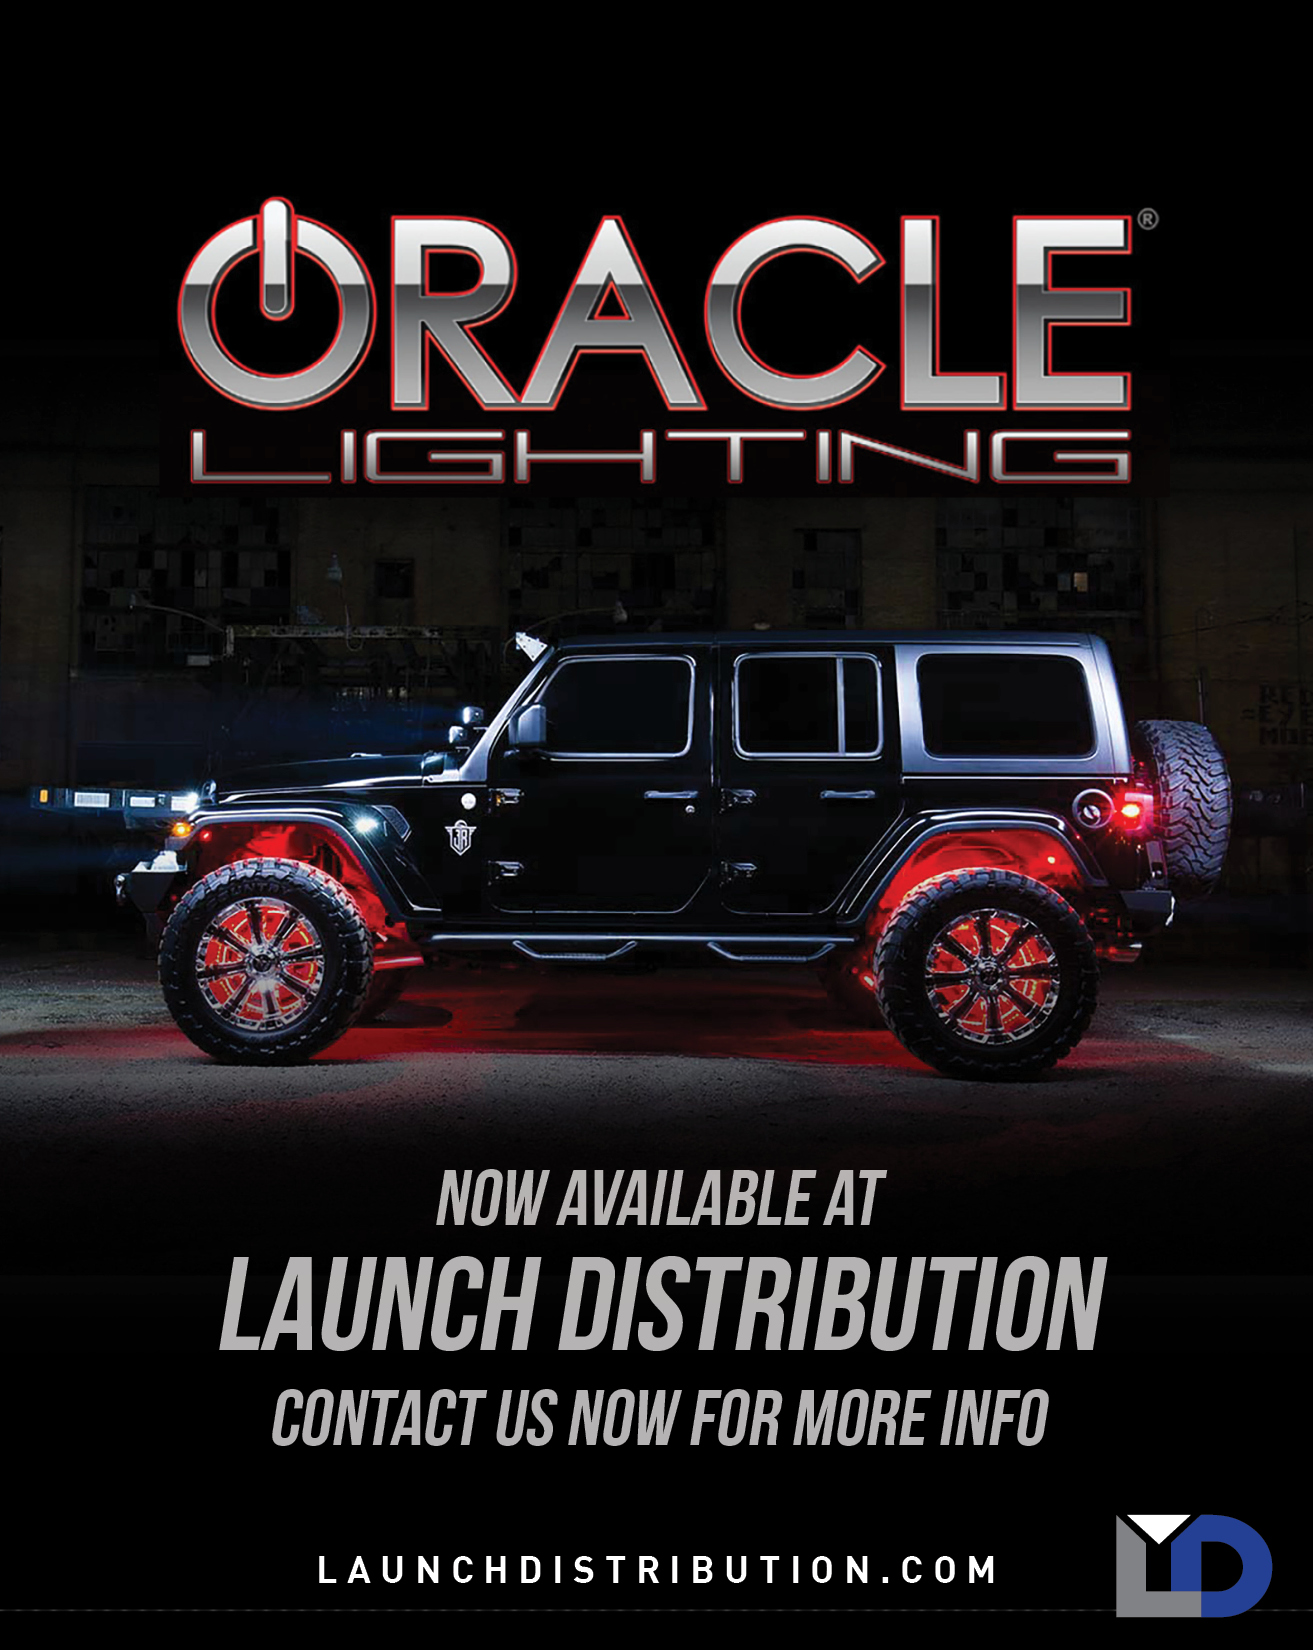 Launch Distribution Welcomes Oracle Lighting